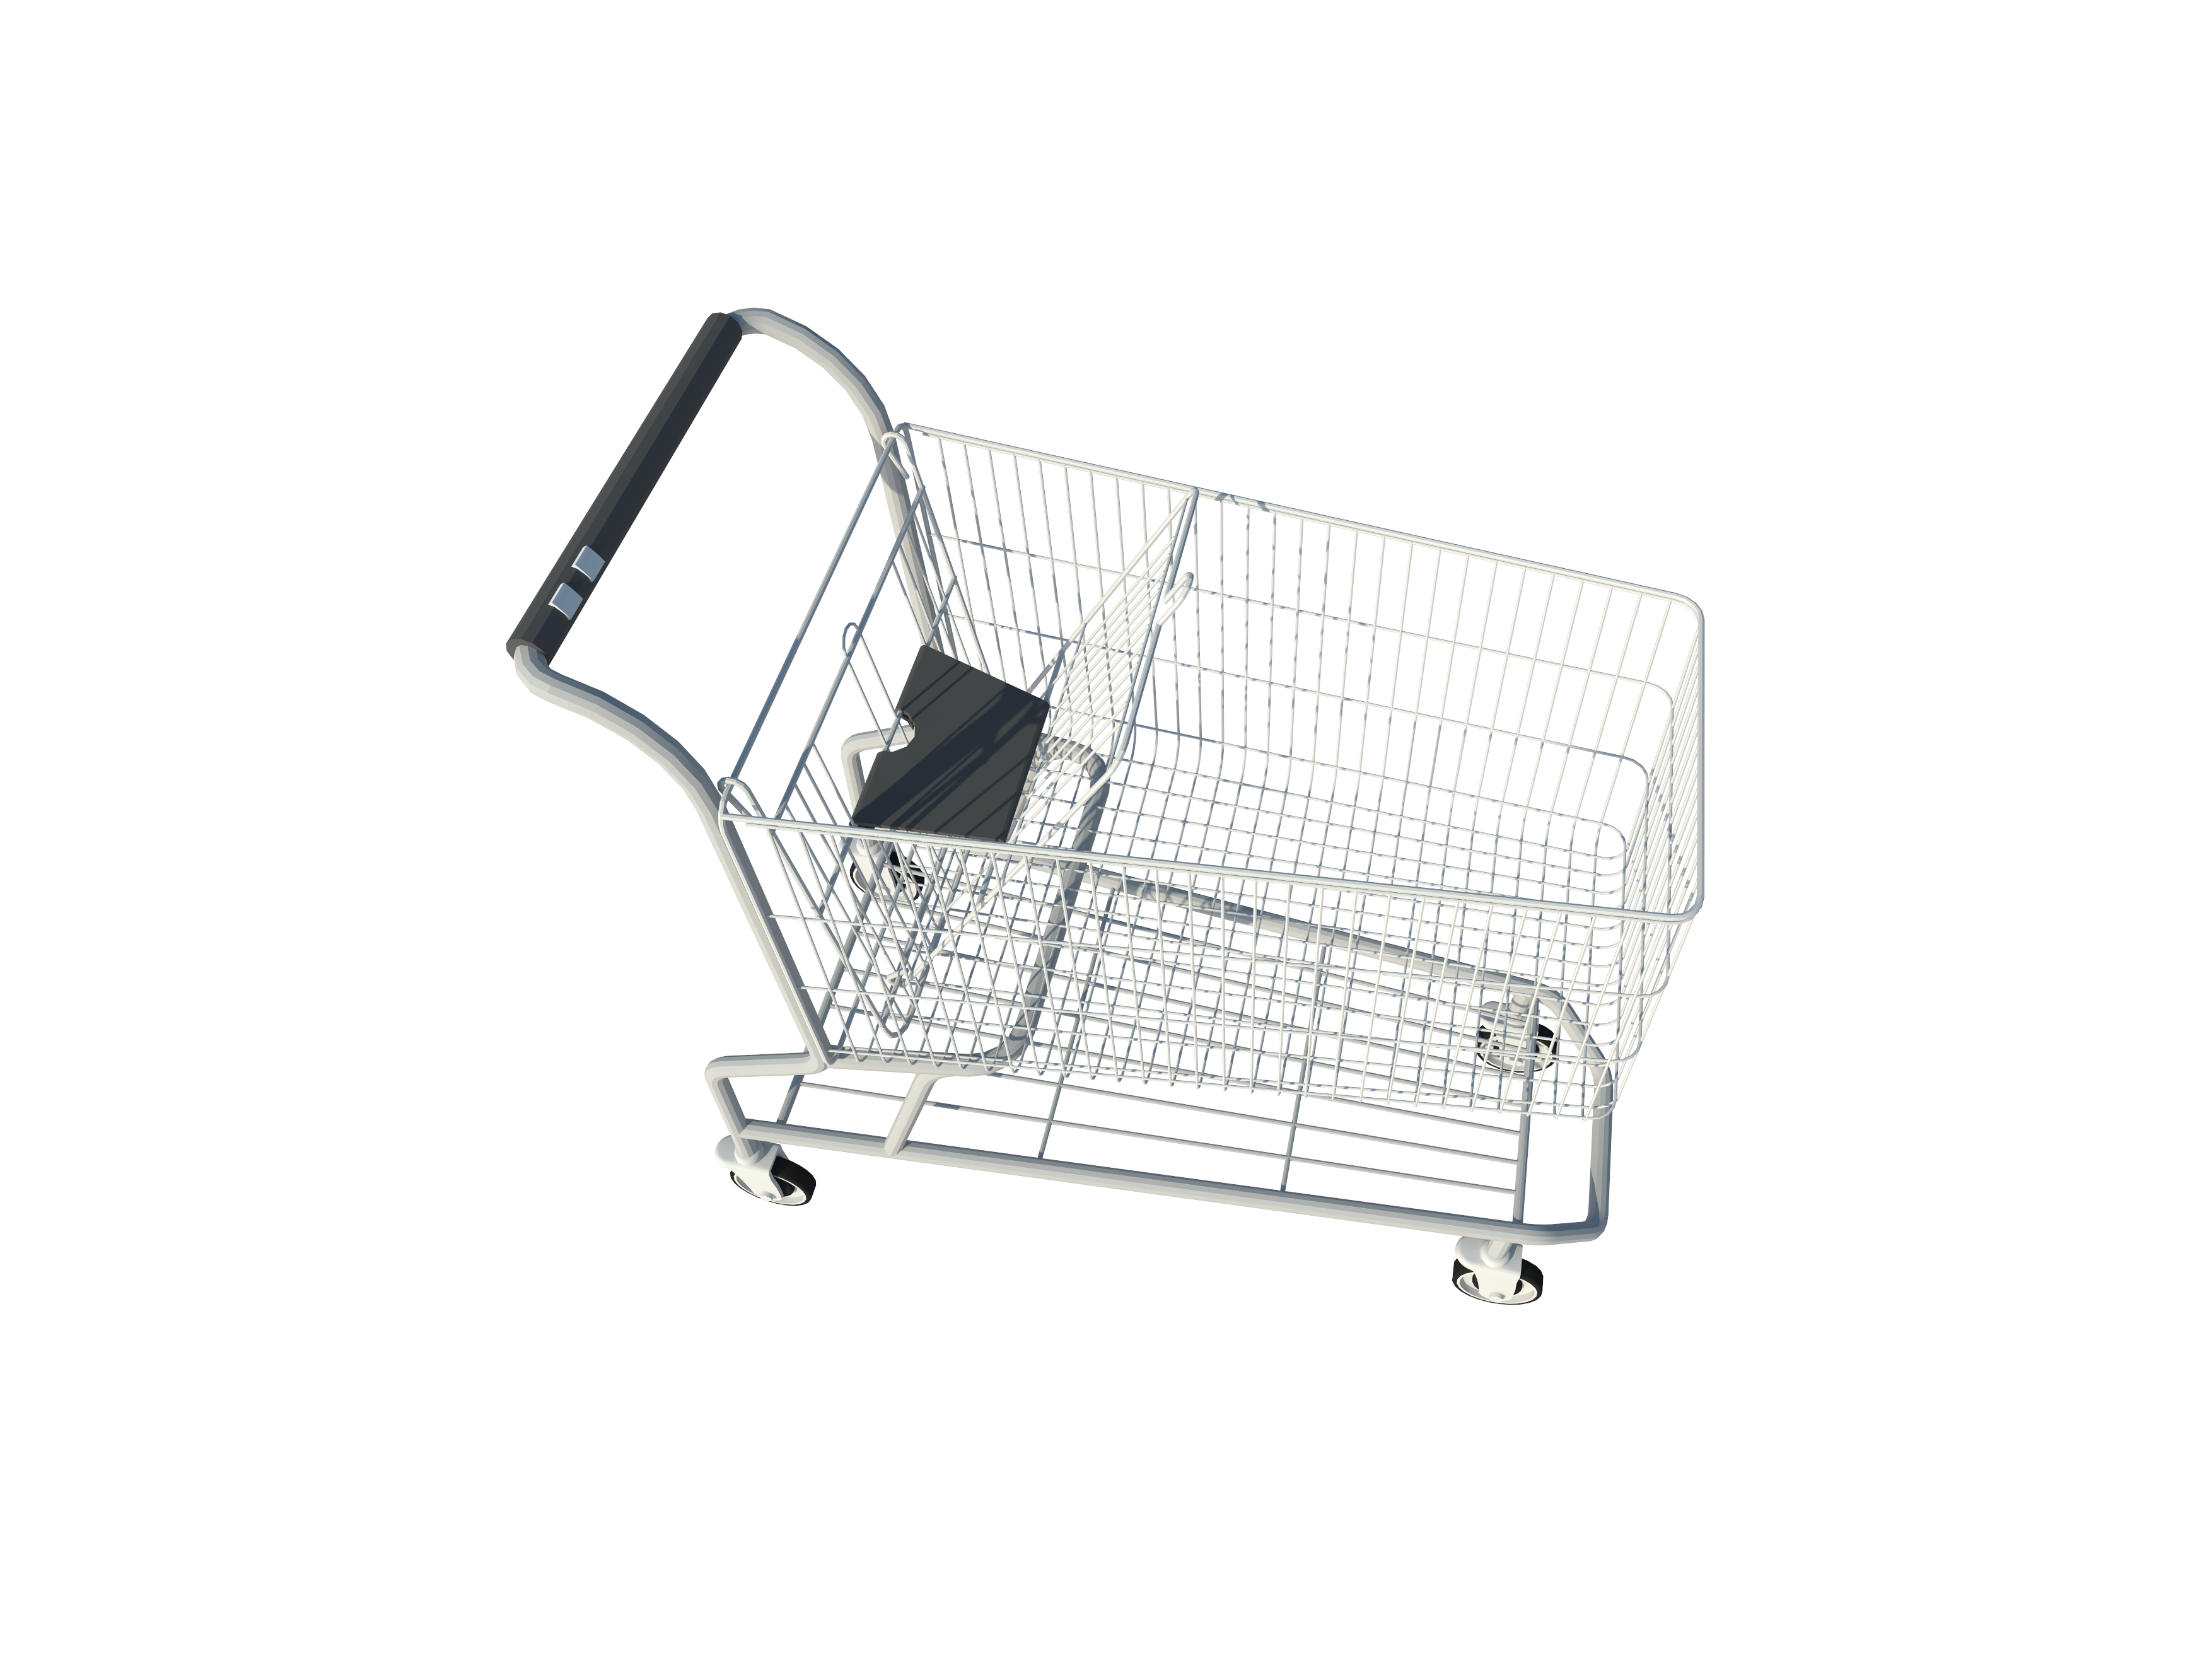 This is amazing because it can be installed to any shopping cart that has a basket and wheels to prevent it from rolling about.